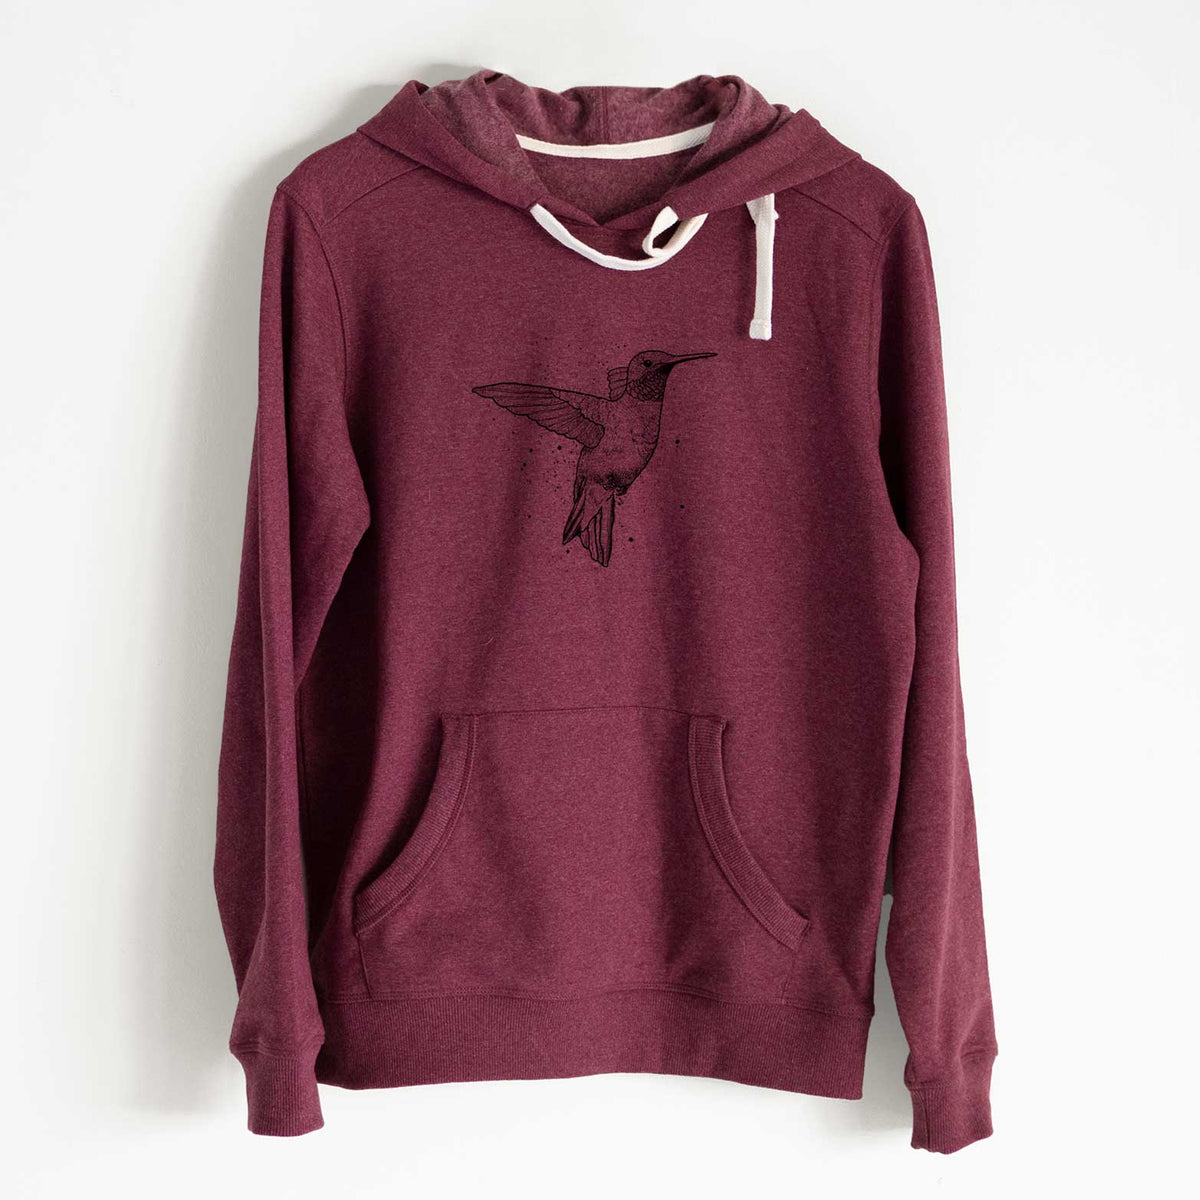 Archilochus Colubris - Ruby-throated Hummingbird - Unisex Recycled Hoodie - CLOSEOUT - FINAL SALE